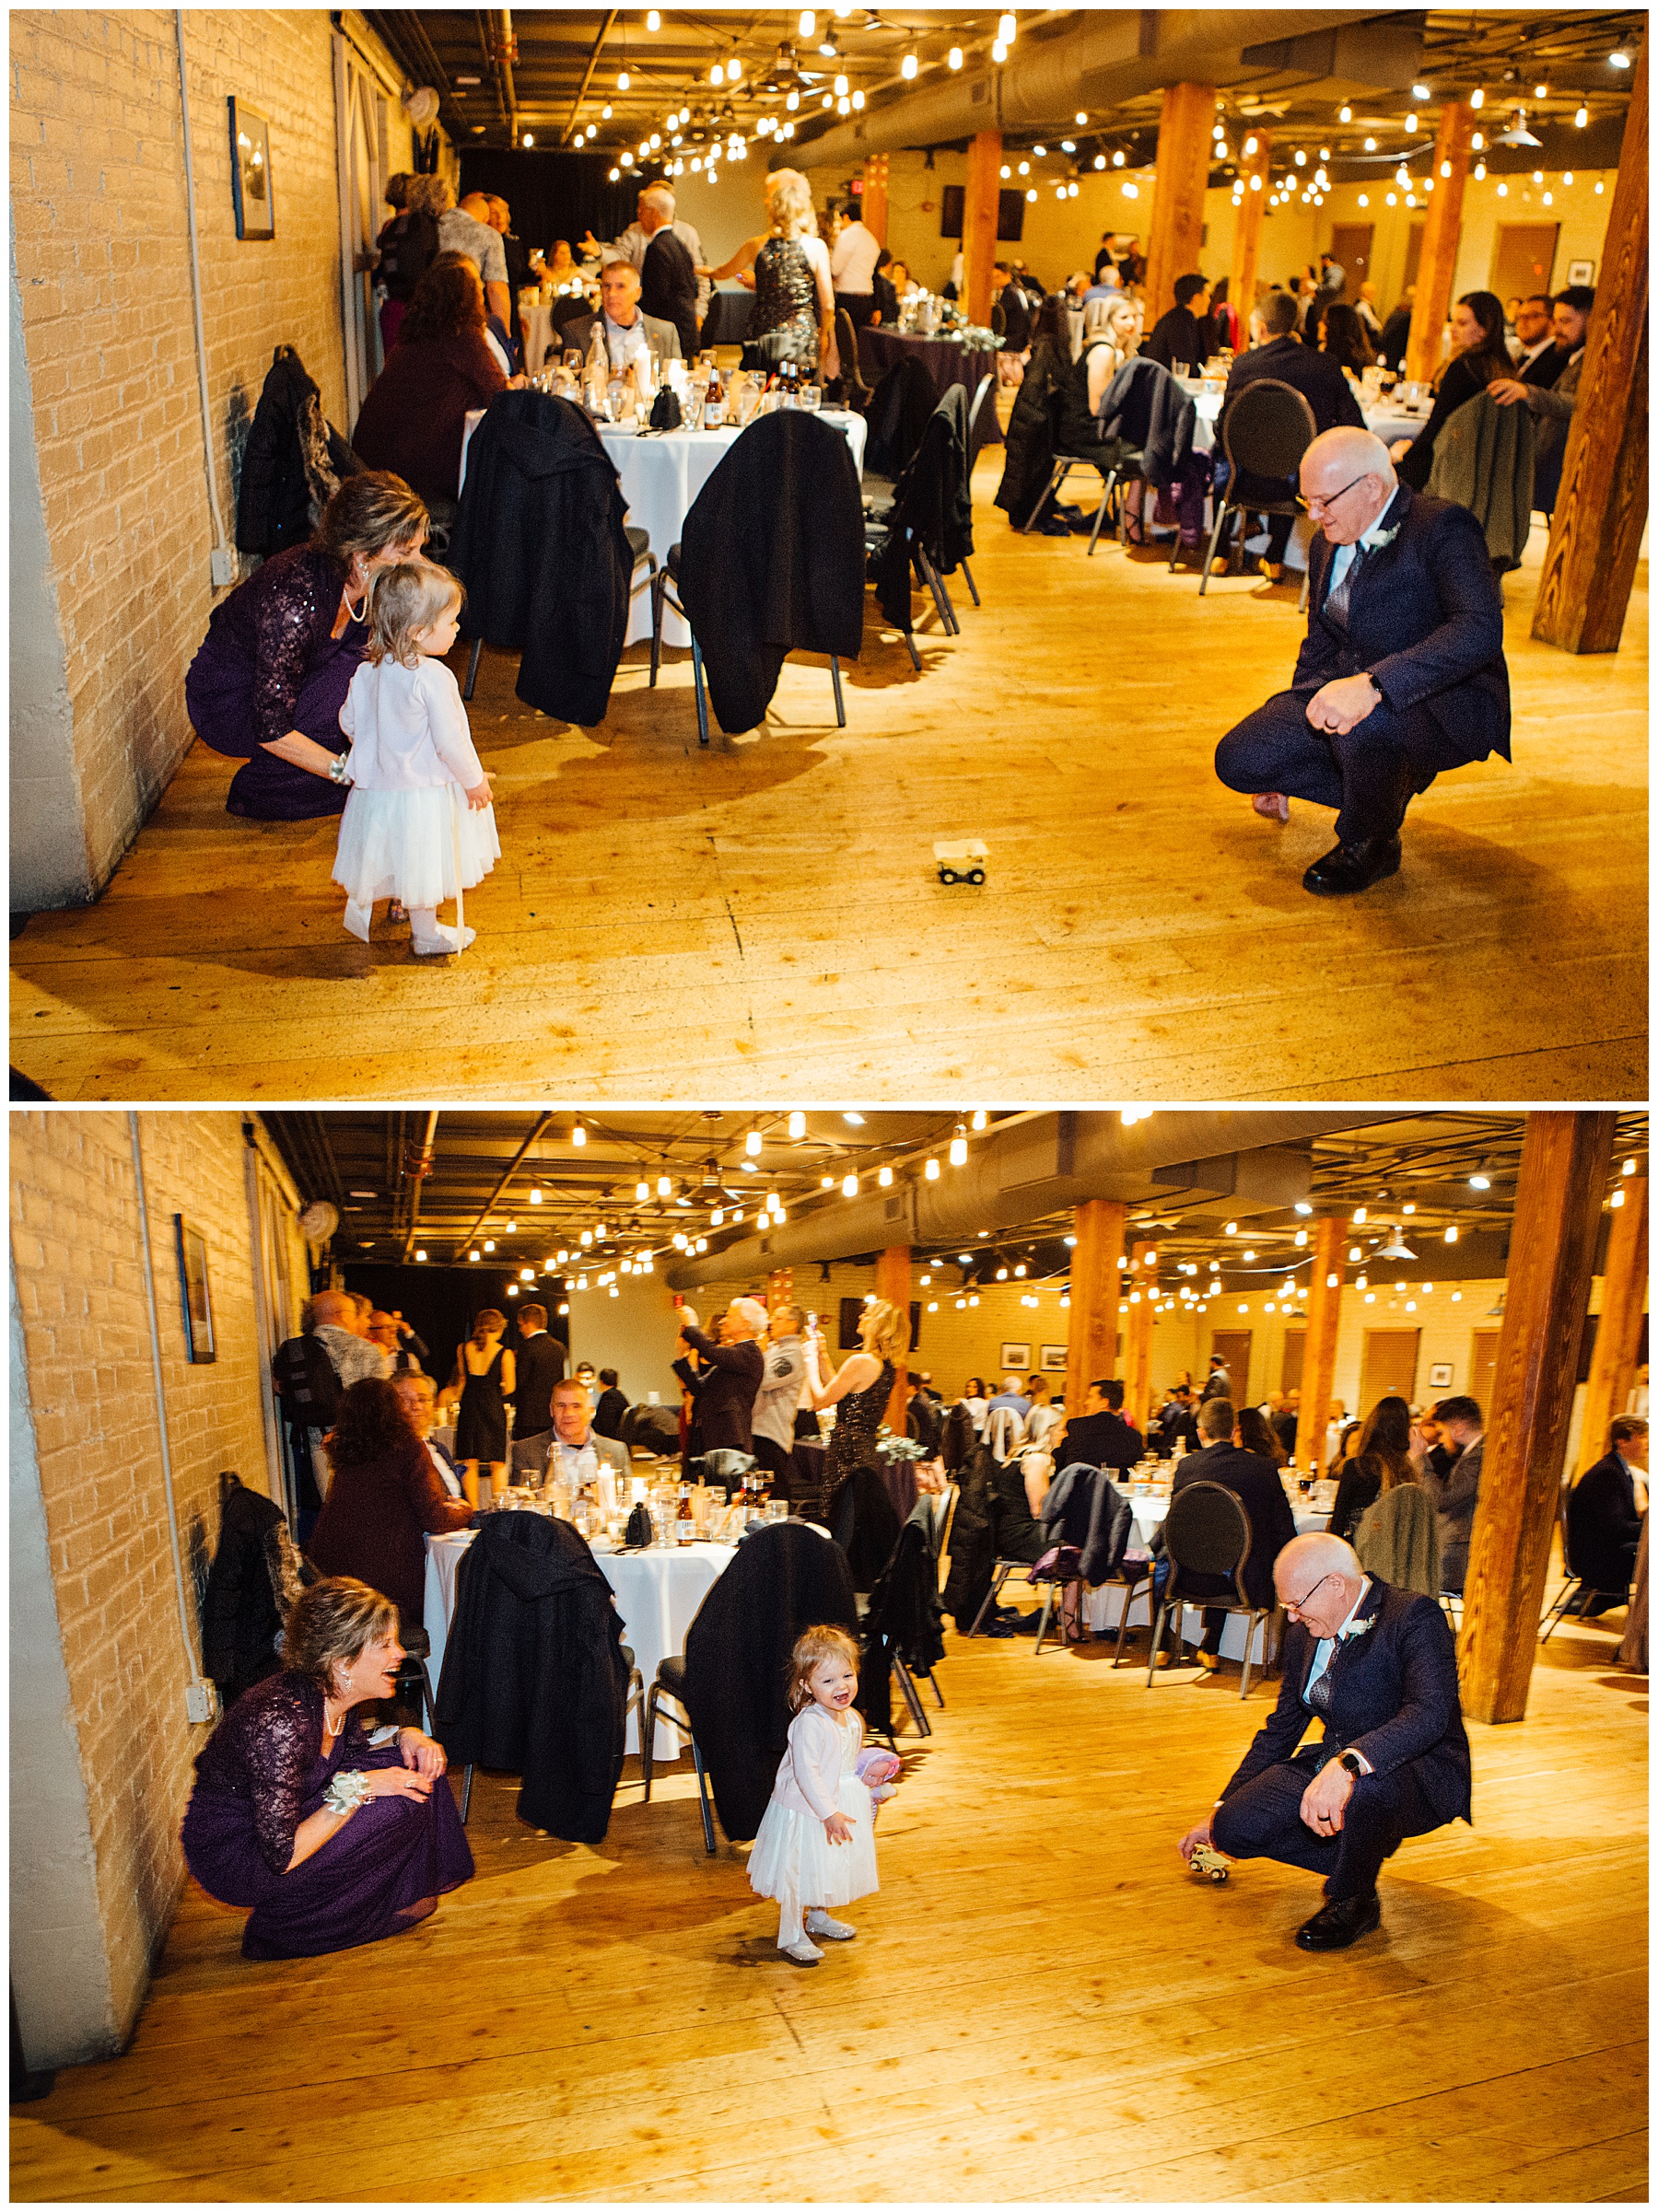 Candid moment of parents with grandchild during reception